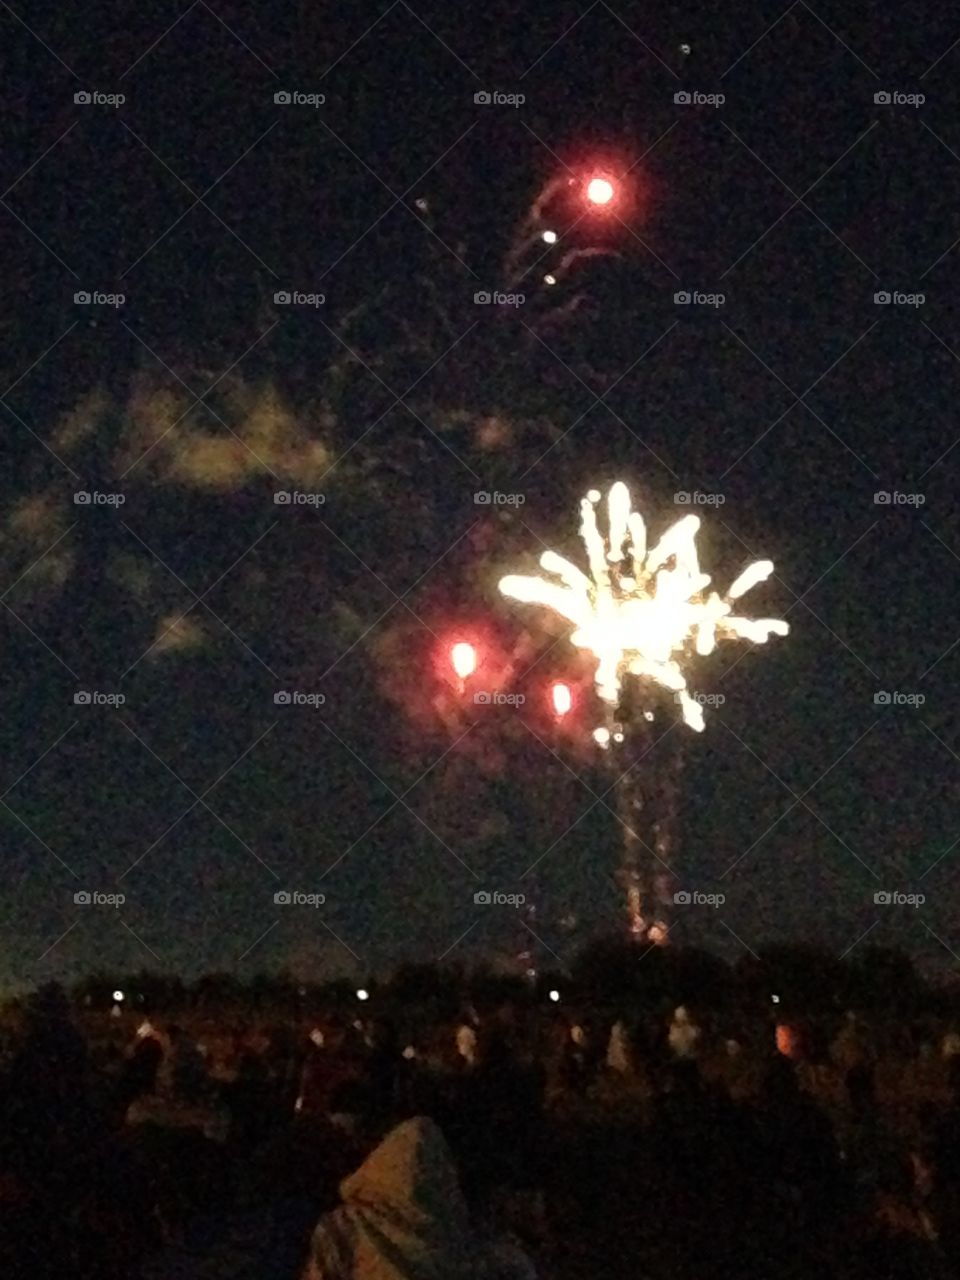 Fireworks- not fully blown up